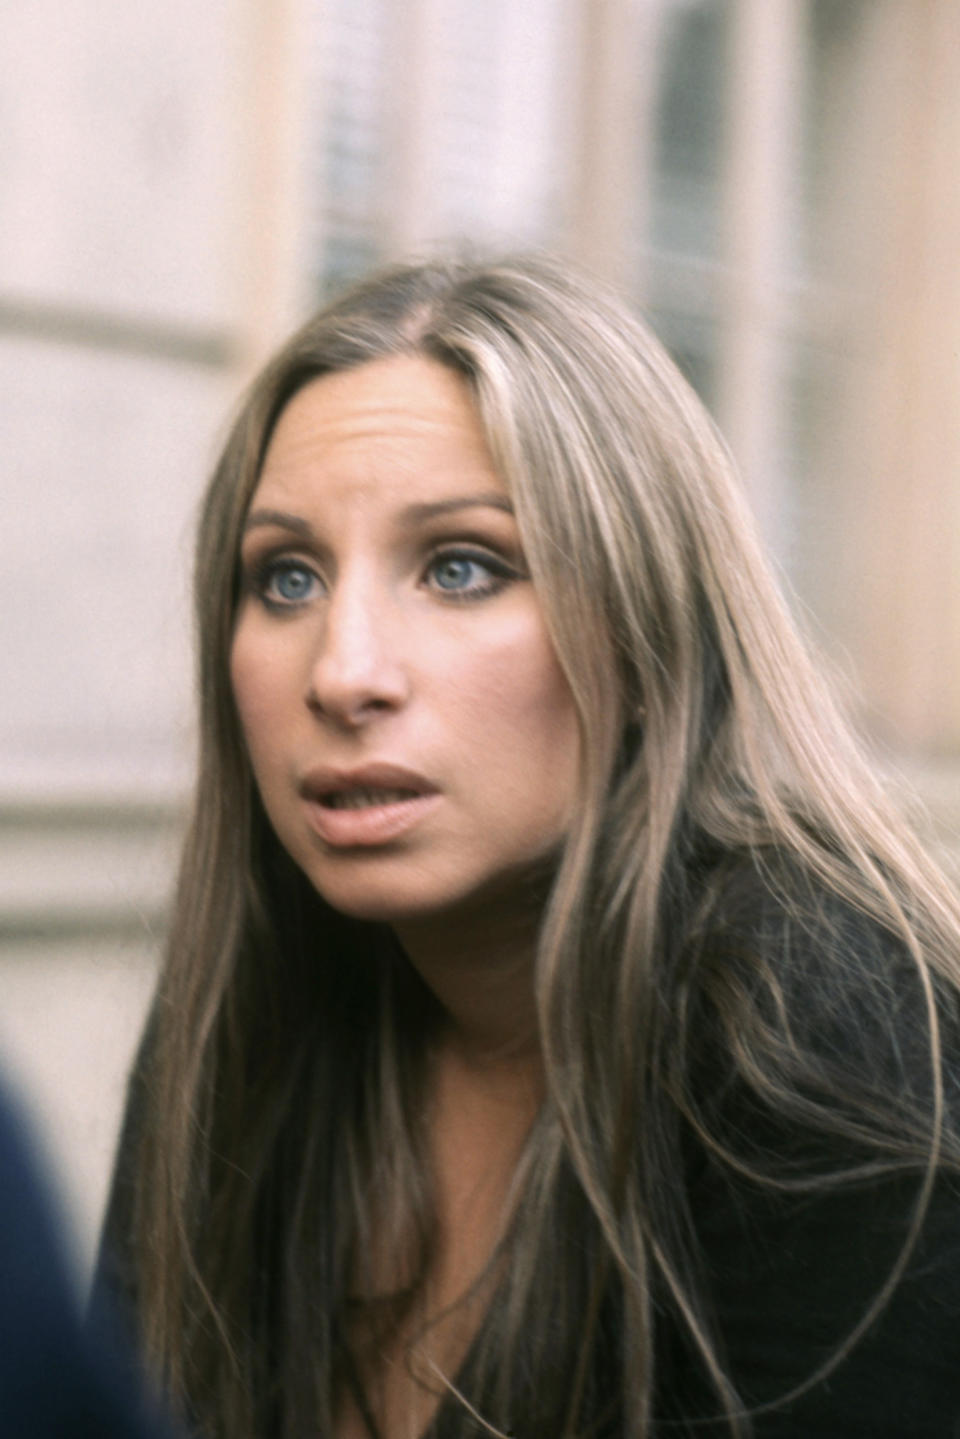 Barbra Streisand is looking up with a concerned expression, her long hair draped over her shoulders